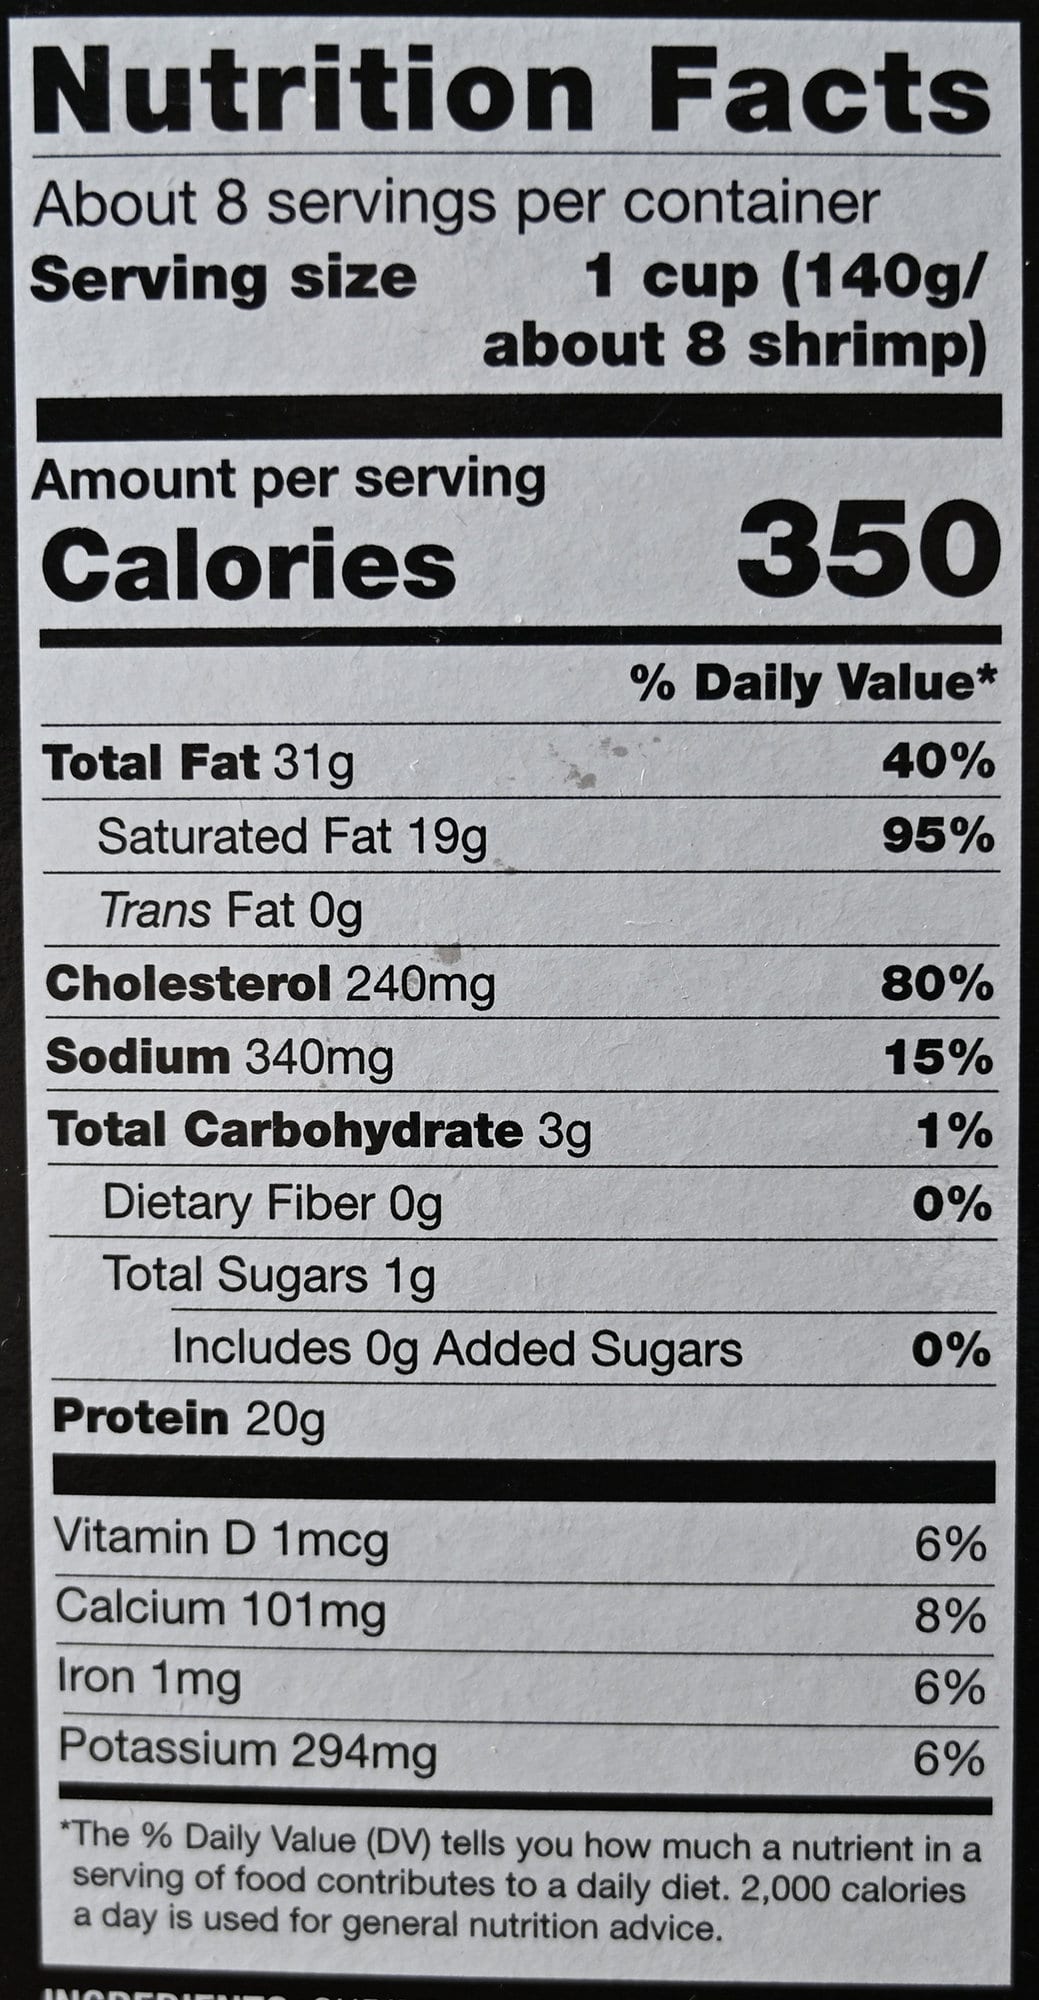 Image of the nutrition facts for the garlic butter shrimp from the back of the box.